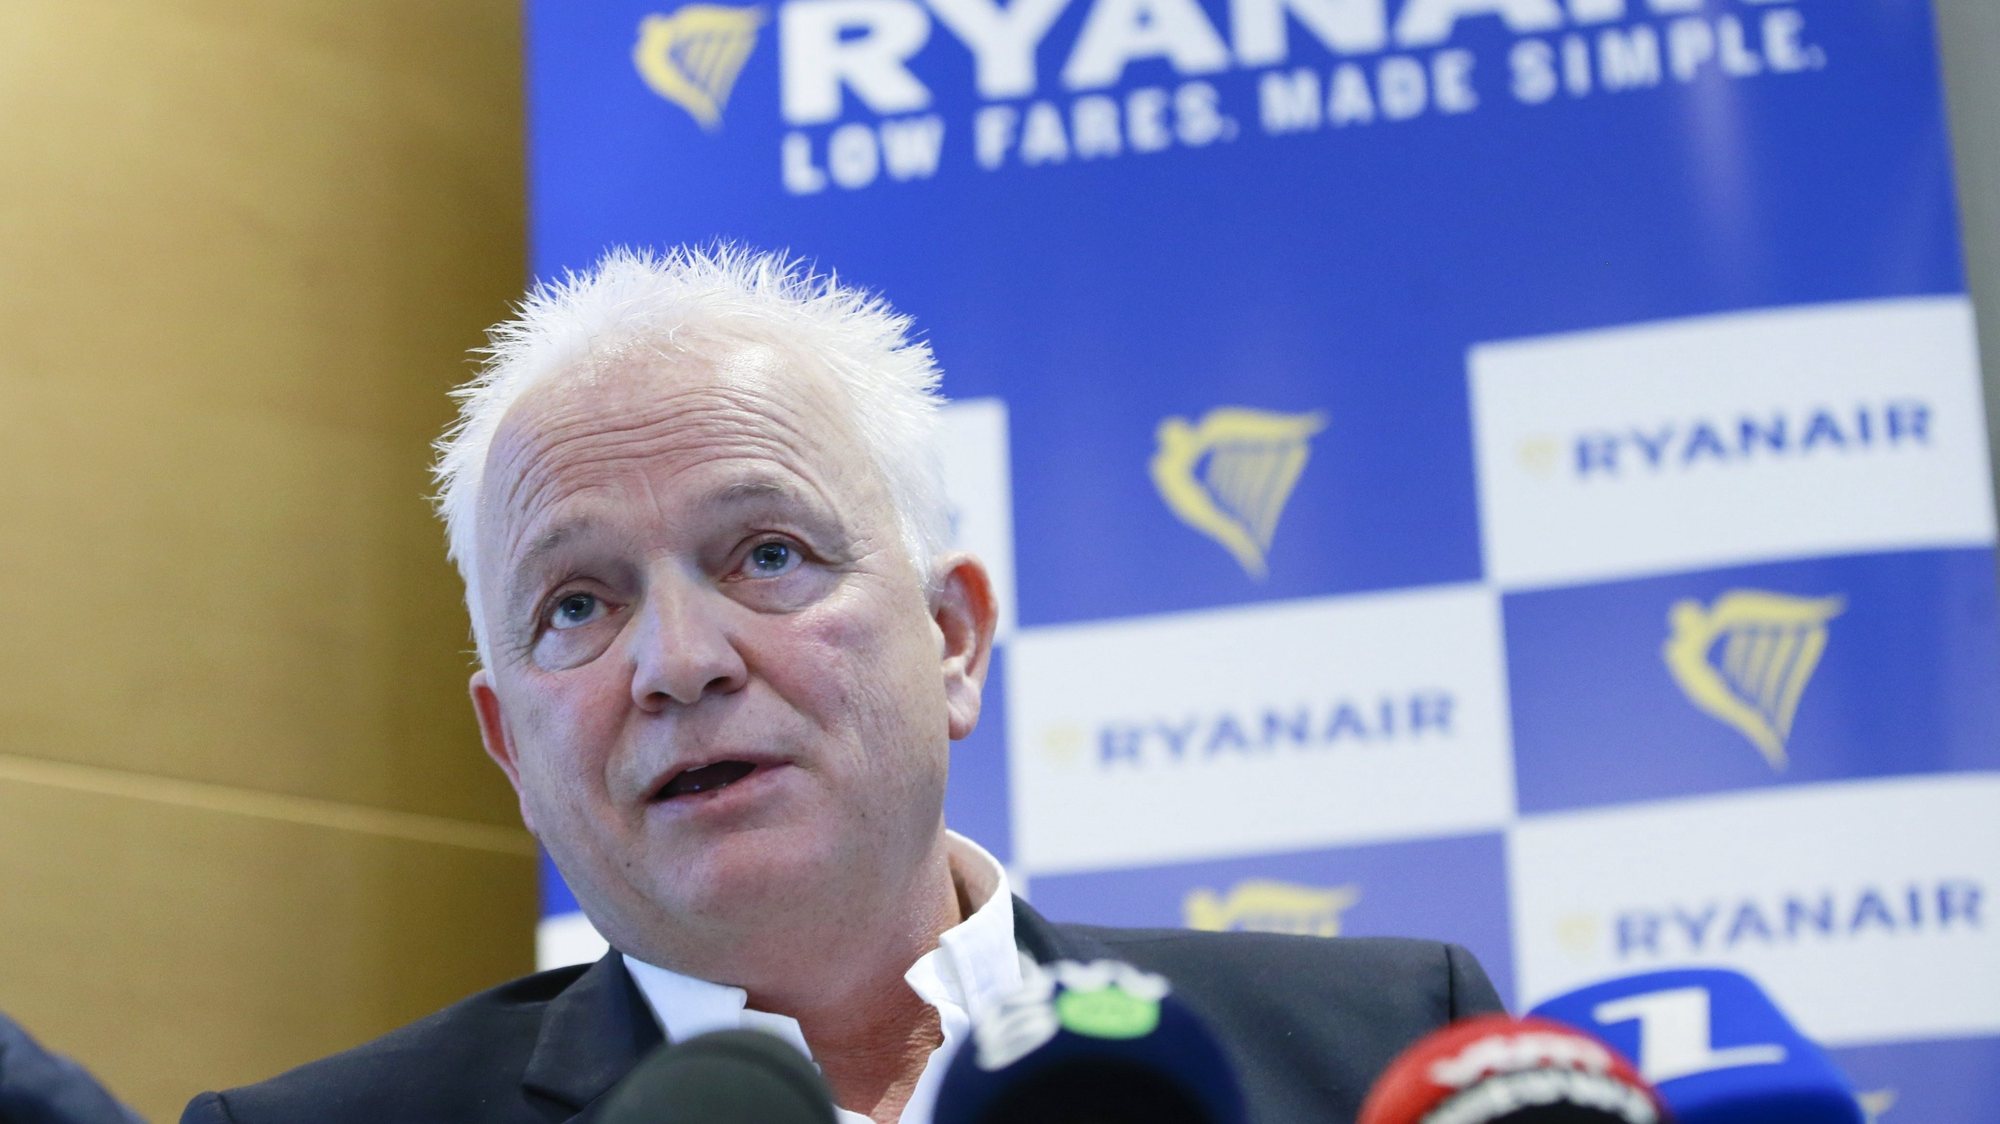 epa06203889 Ryanair&#039;s Chief People Officer Eddie Wilson gives a press conference in Brussels, Belgium, 14 September 2017. Wilson commented on the decision by European Court of Justice (ECJ) in the so-called &#039;Mons&#039; case to rule in favour of Irish low-cost carrier Ryanair and reject the CTC Union&#039;s argument.  EPA/OLIVIER HOSLET